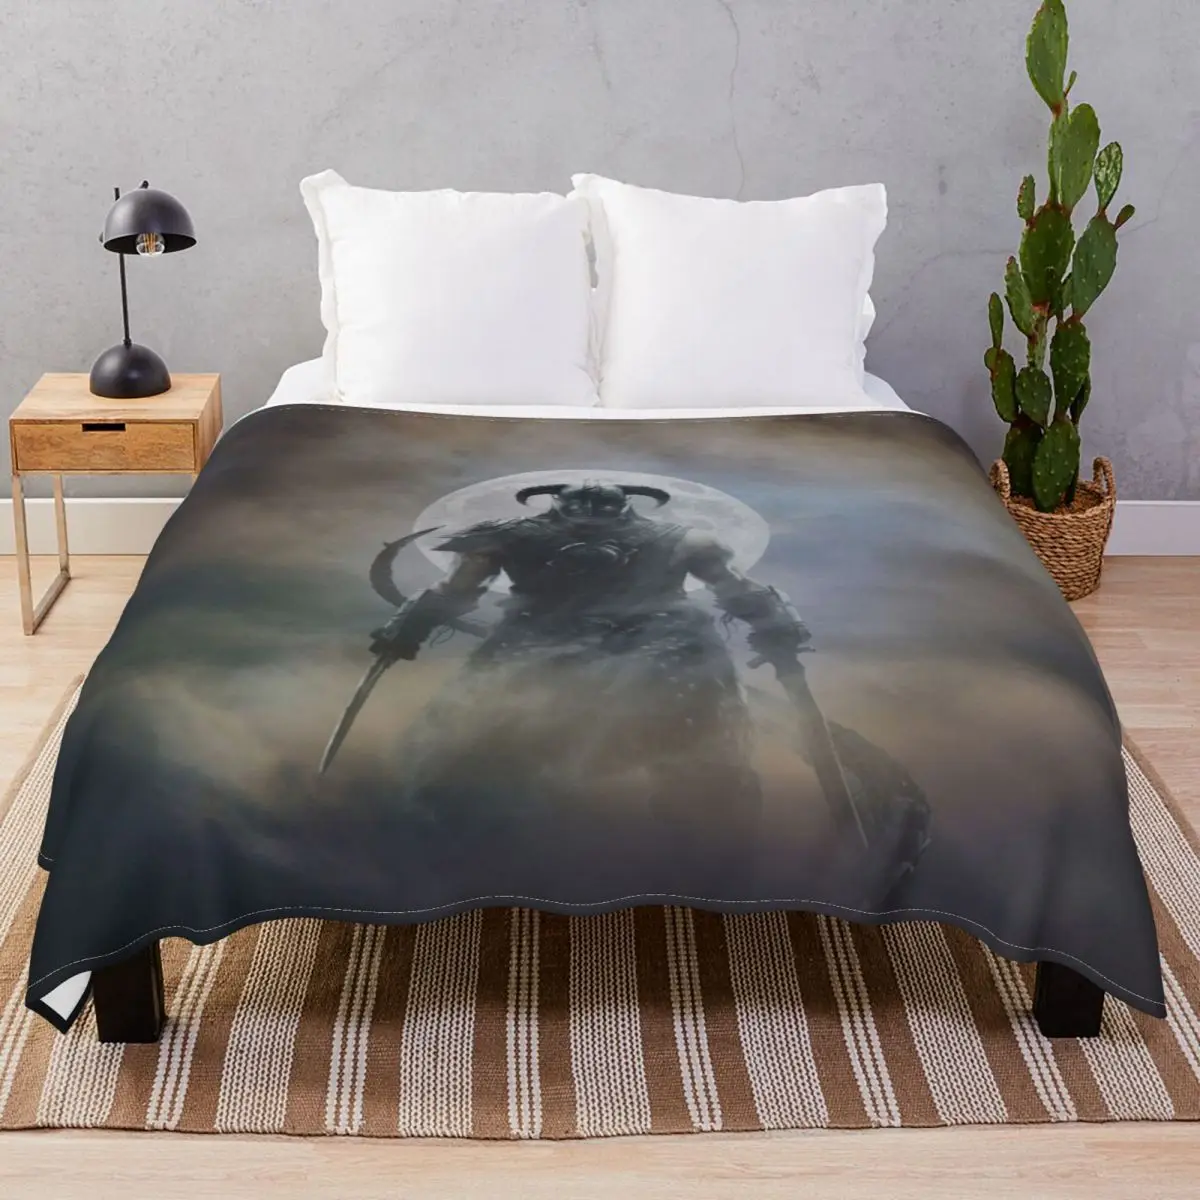 Skyrim Warrior Blankets Flannel Plush Decoration Fluffy Throw Blanket for Bed Home Couch Camp Office